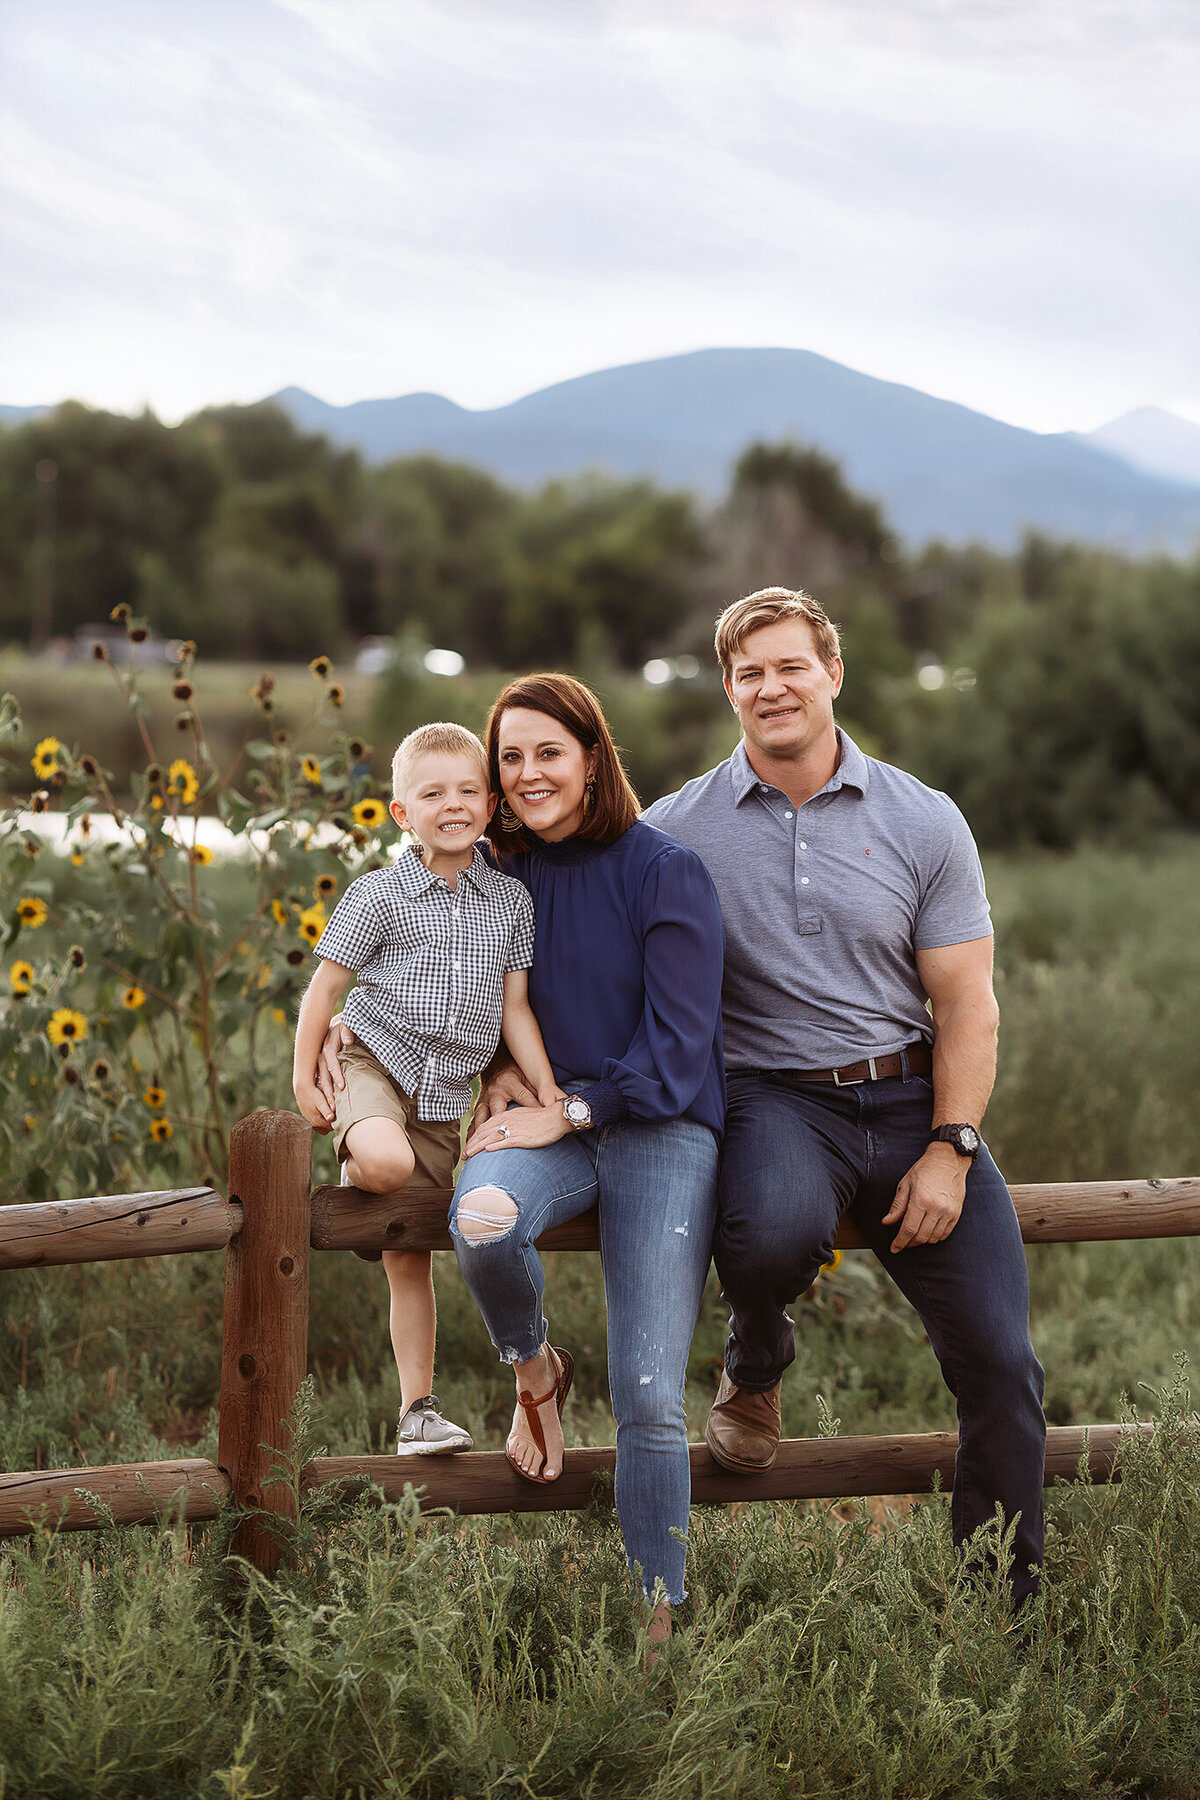 beautiful family photos in loveland field during the summer blooms